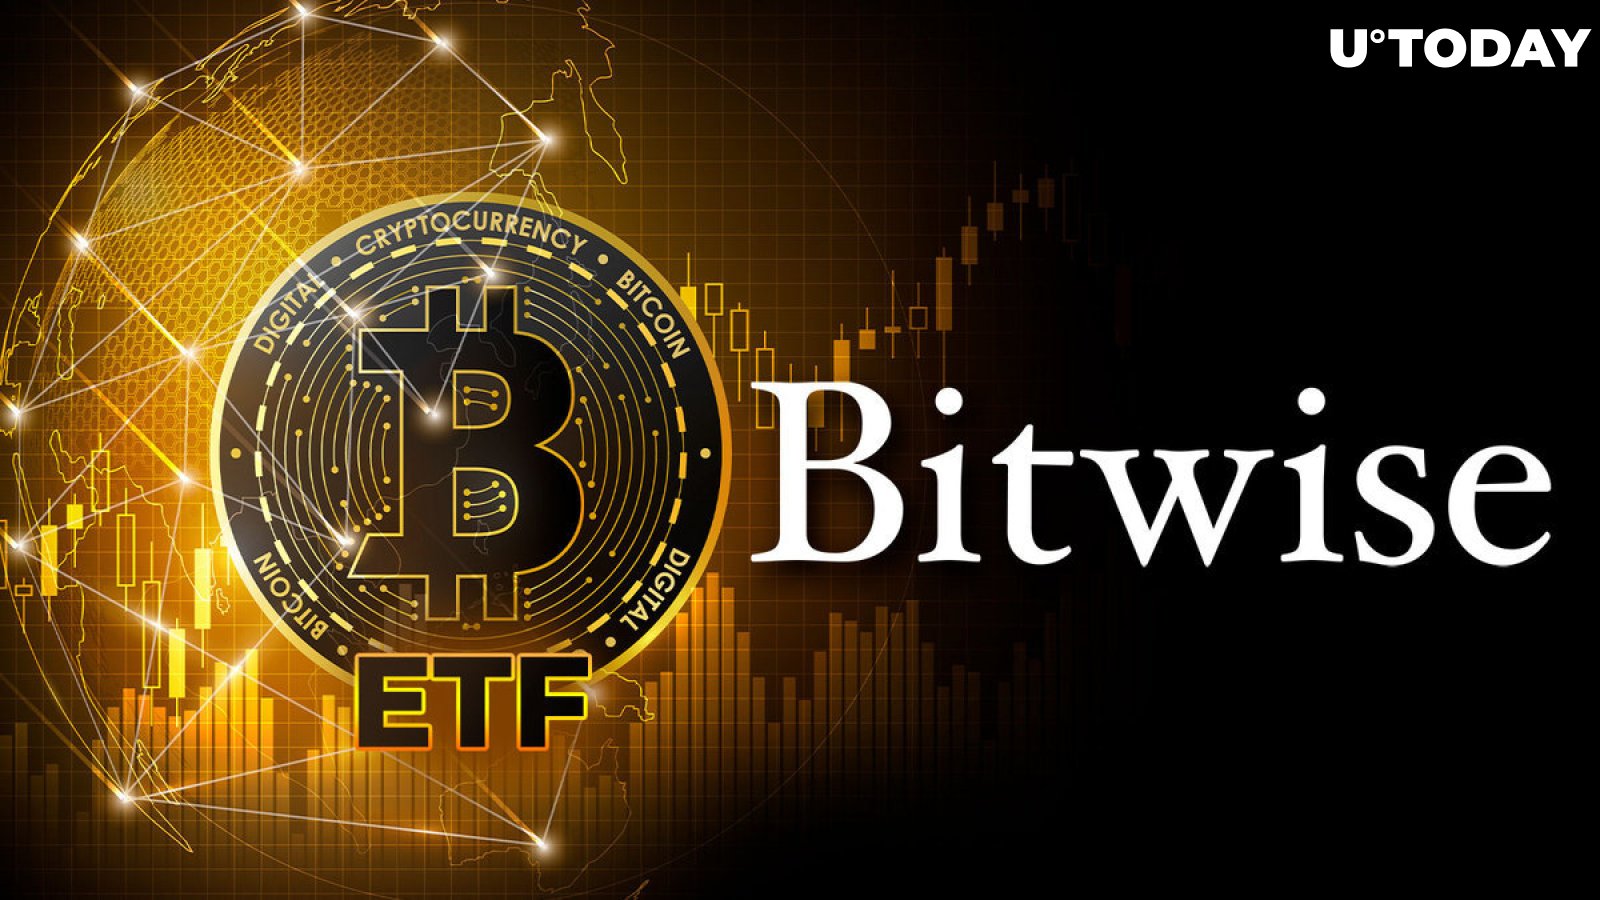 Bitwise Just Made History With Its Spot Bitcoin ETF: Details